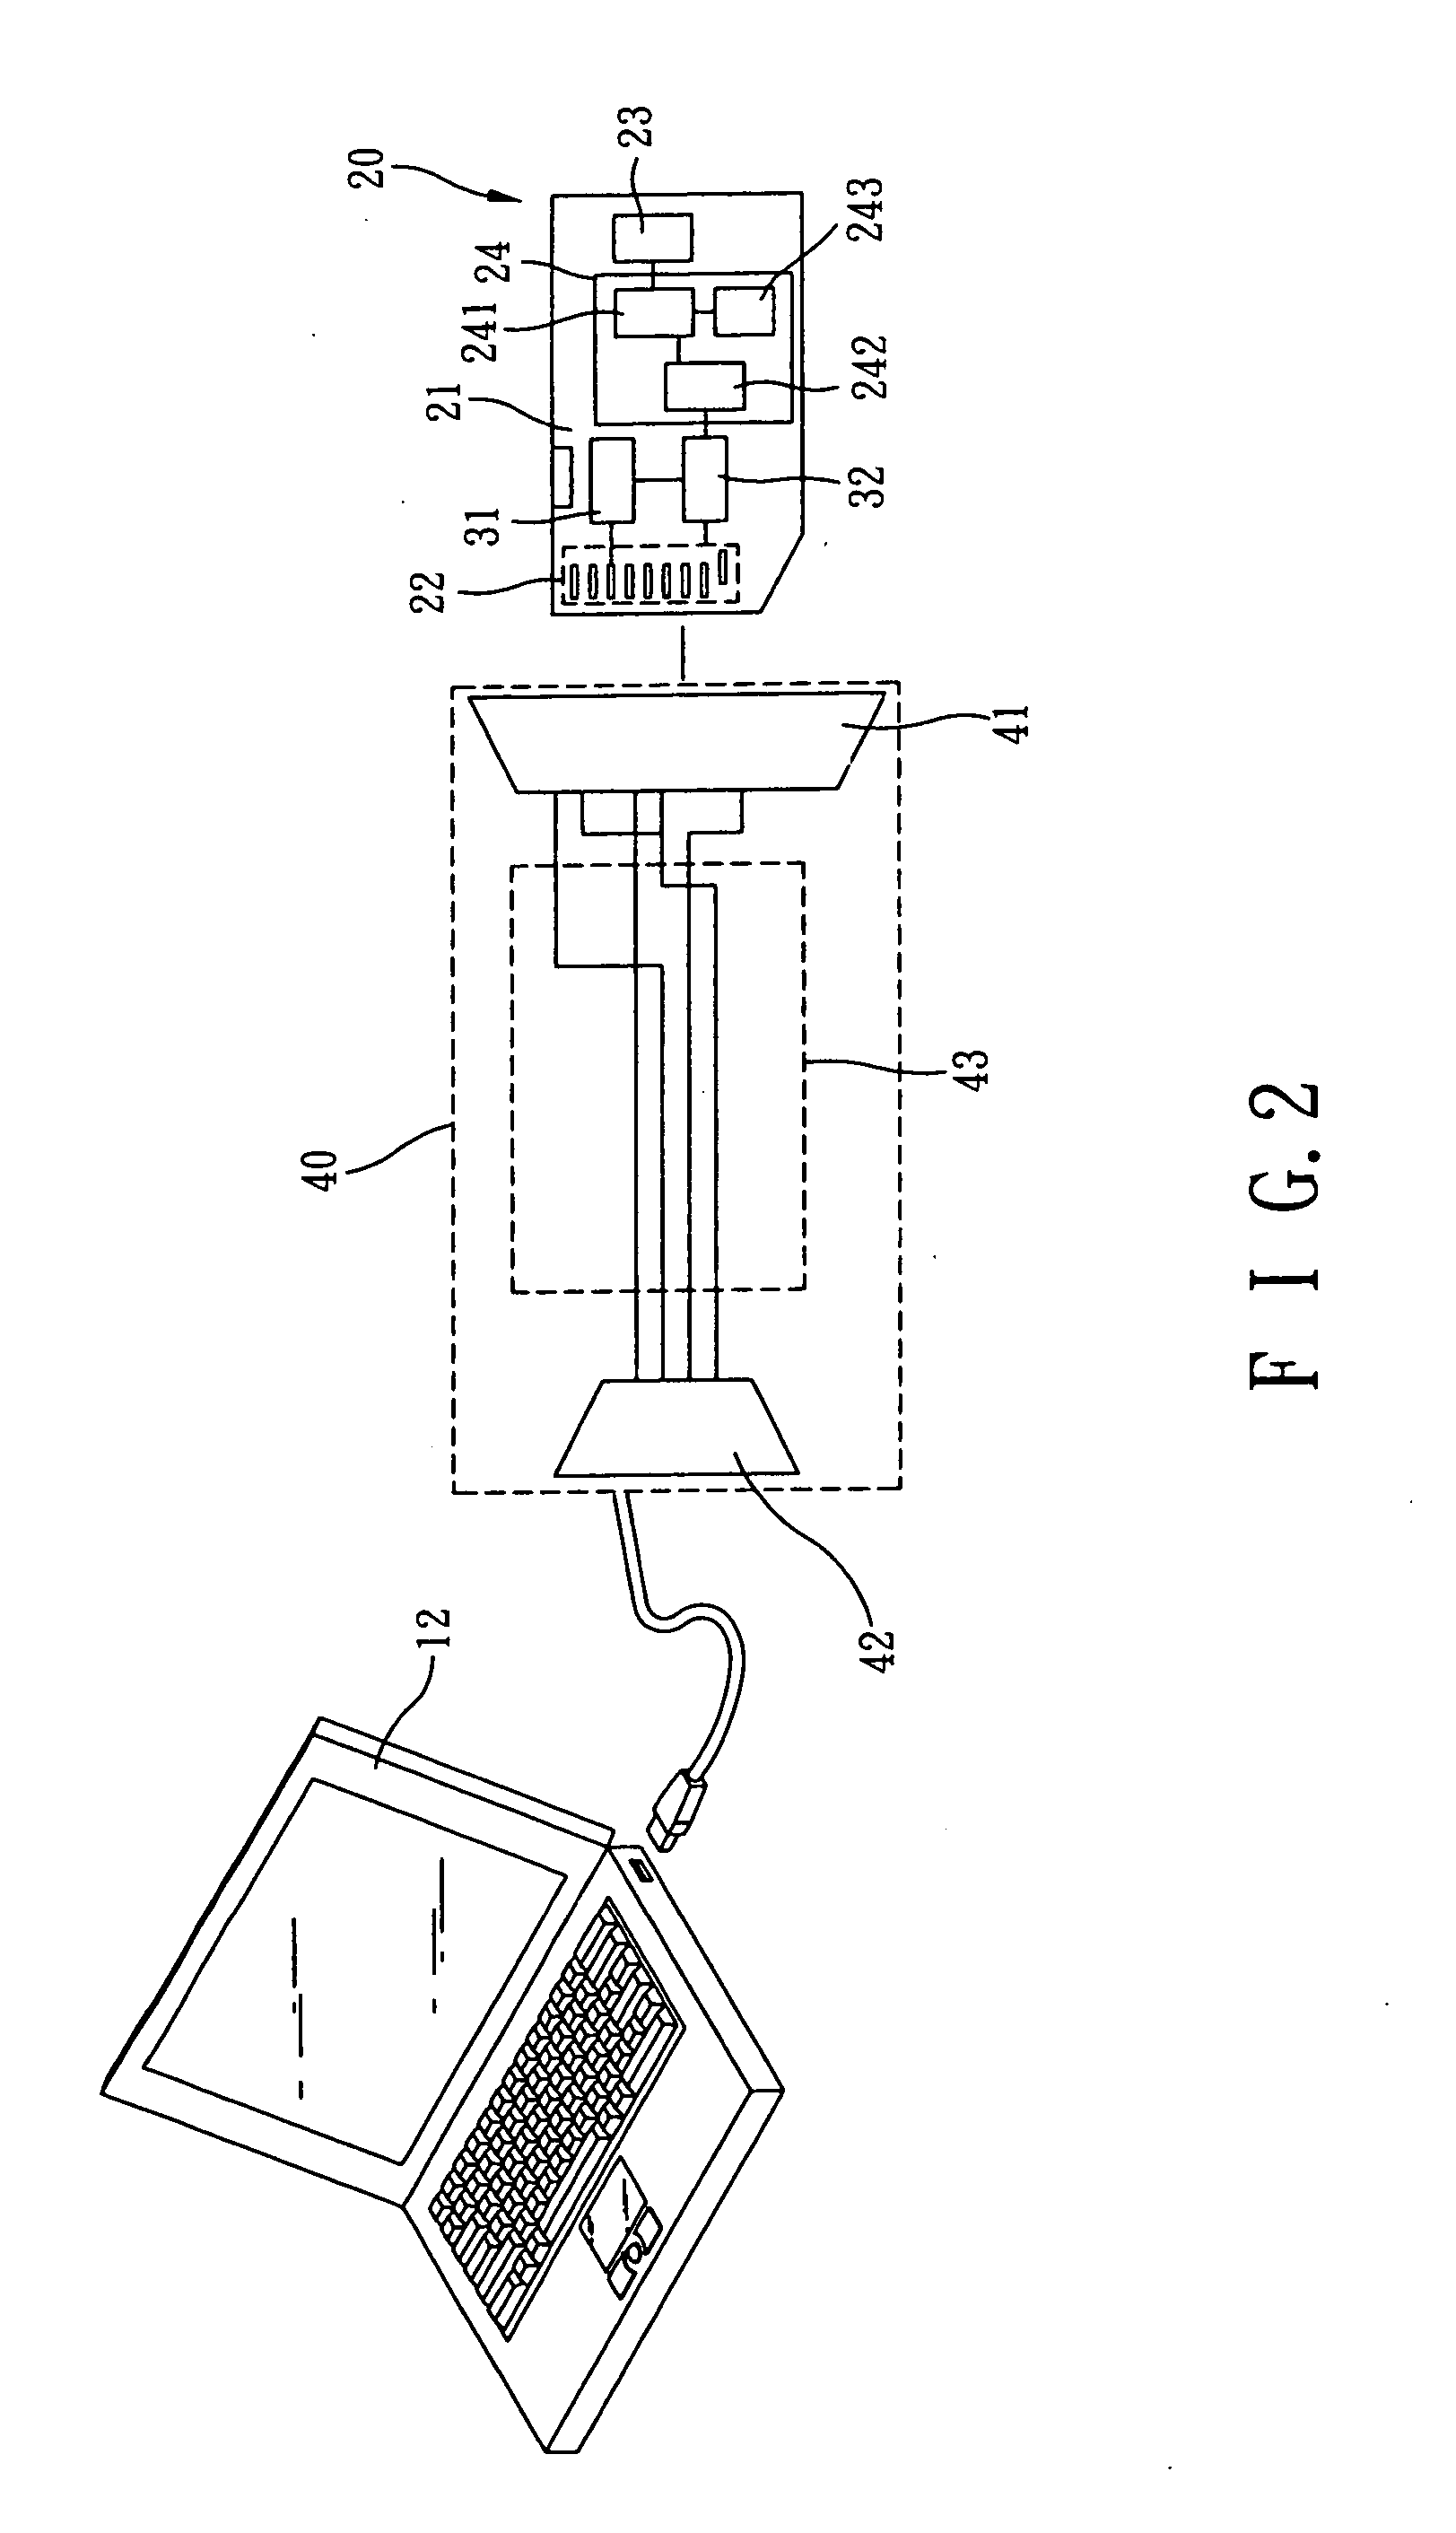 Mult-interface auto-switch circuit and memory device with dual interface auto-switch circuit